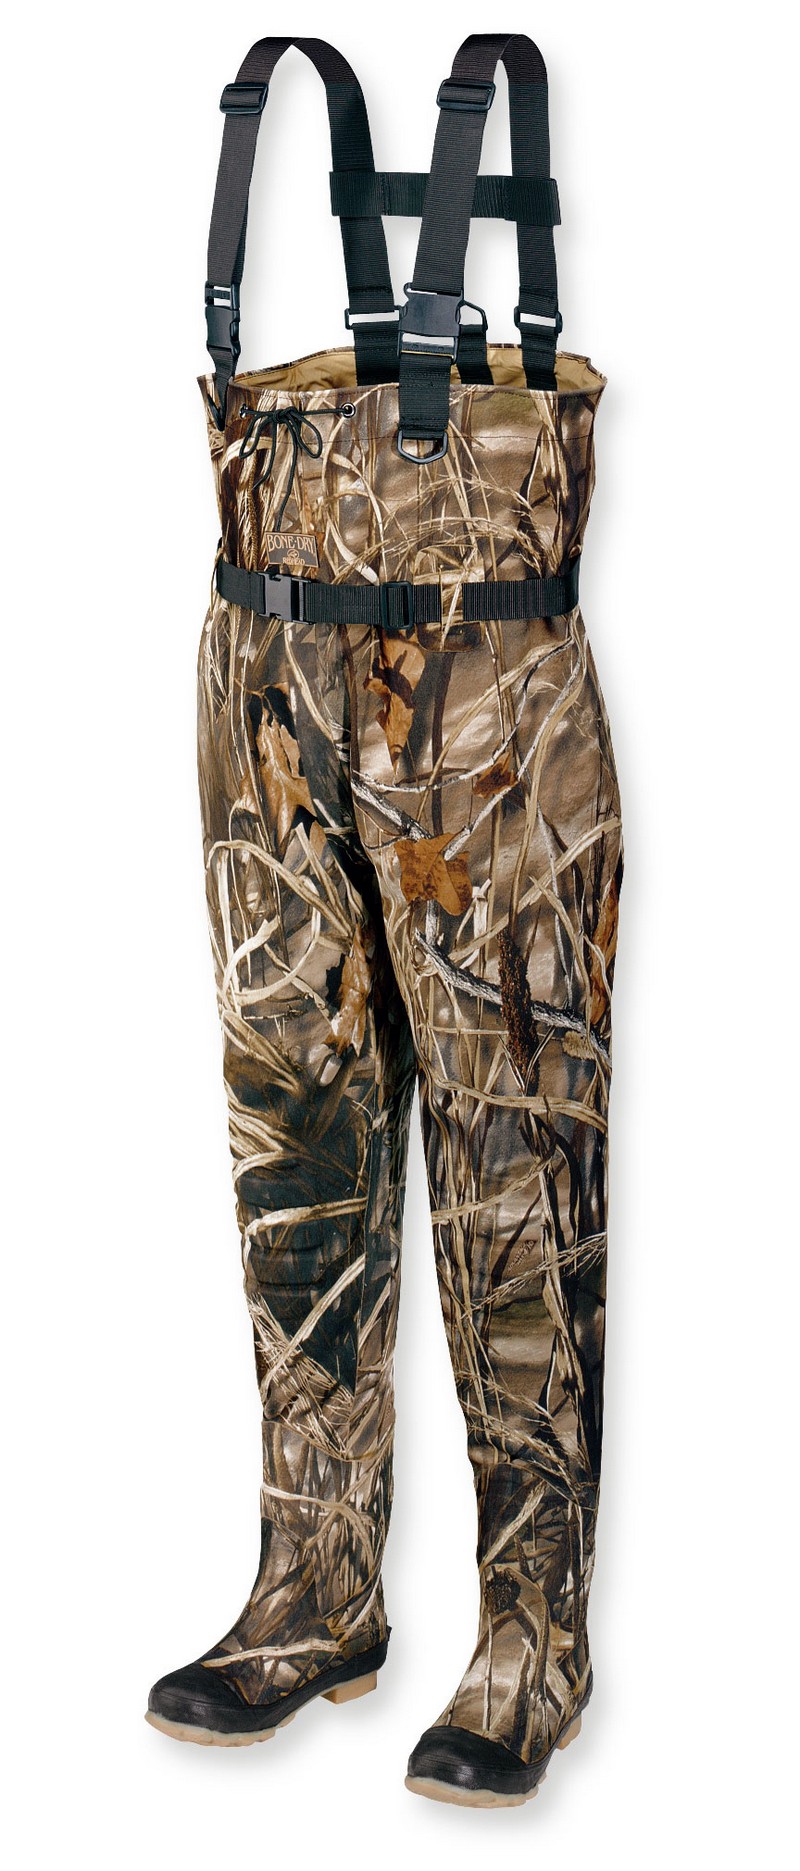 Duck hunting gear for a first timer... | TigerDroppings.com